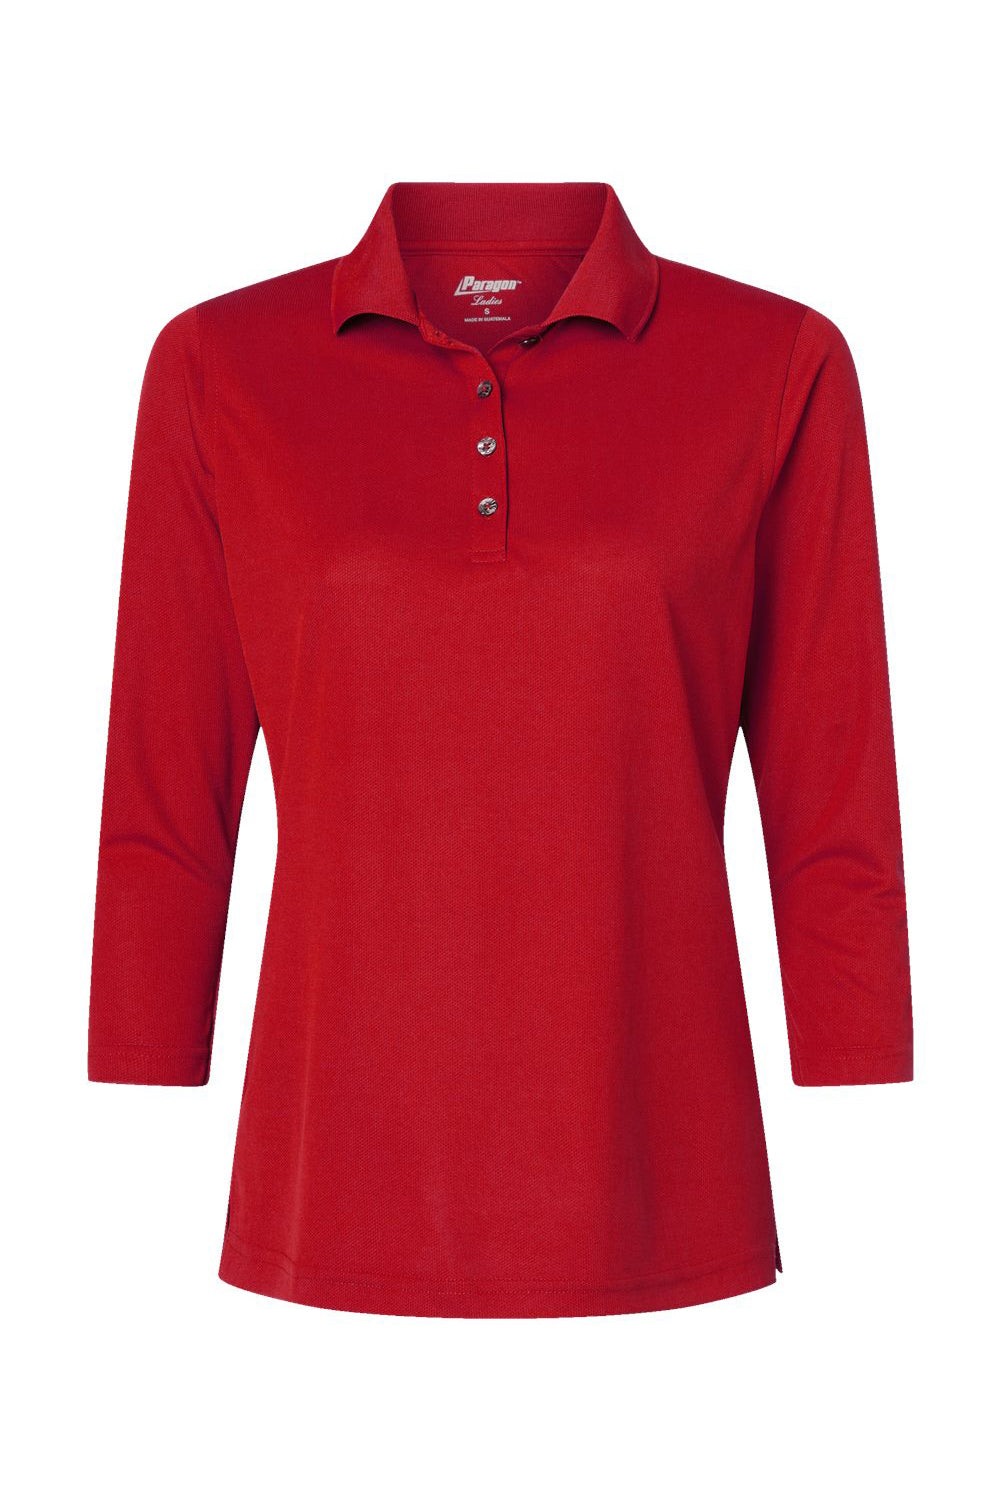 Paragon 120 Womens Lady Palm 3/4 Sleeve Polo Shirt Red Flat Front